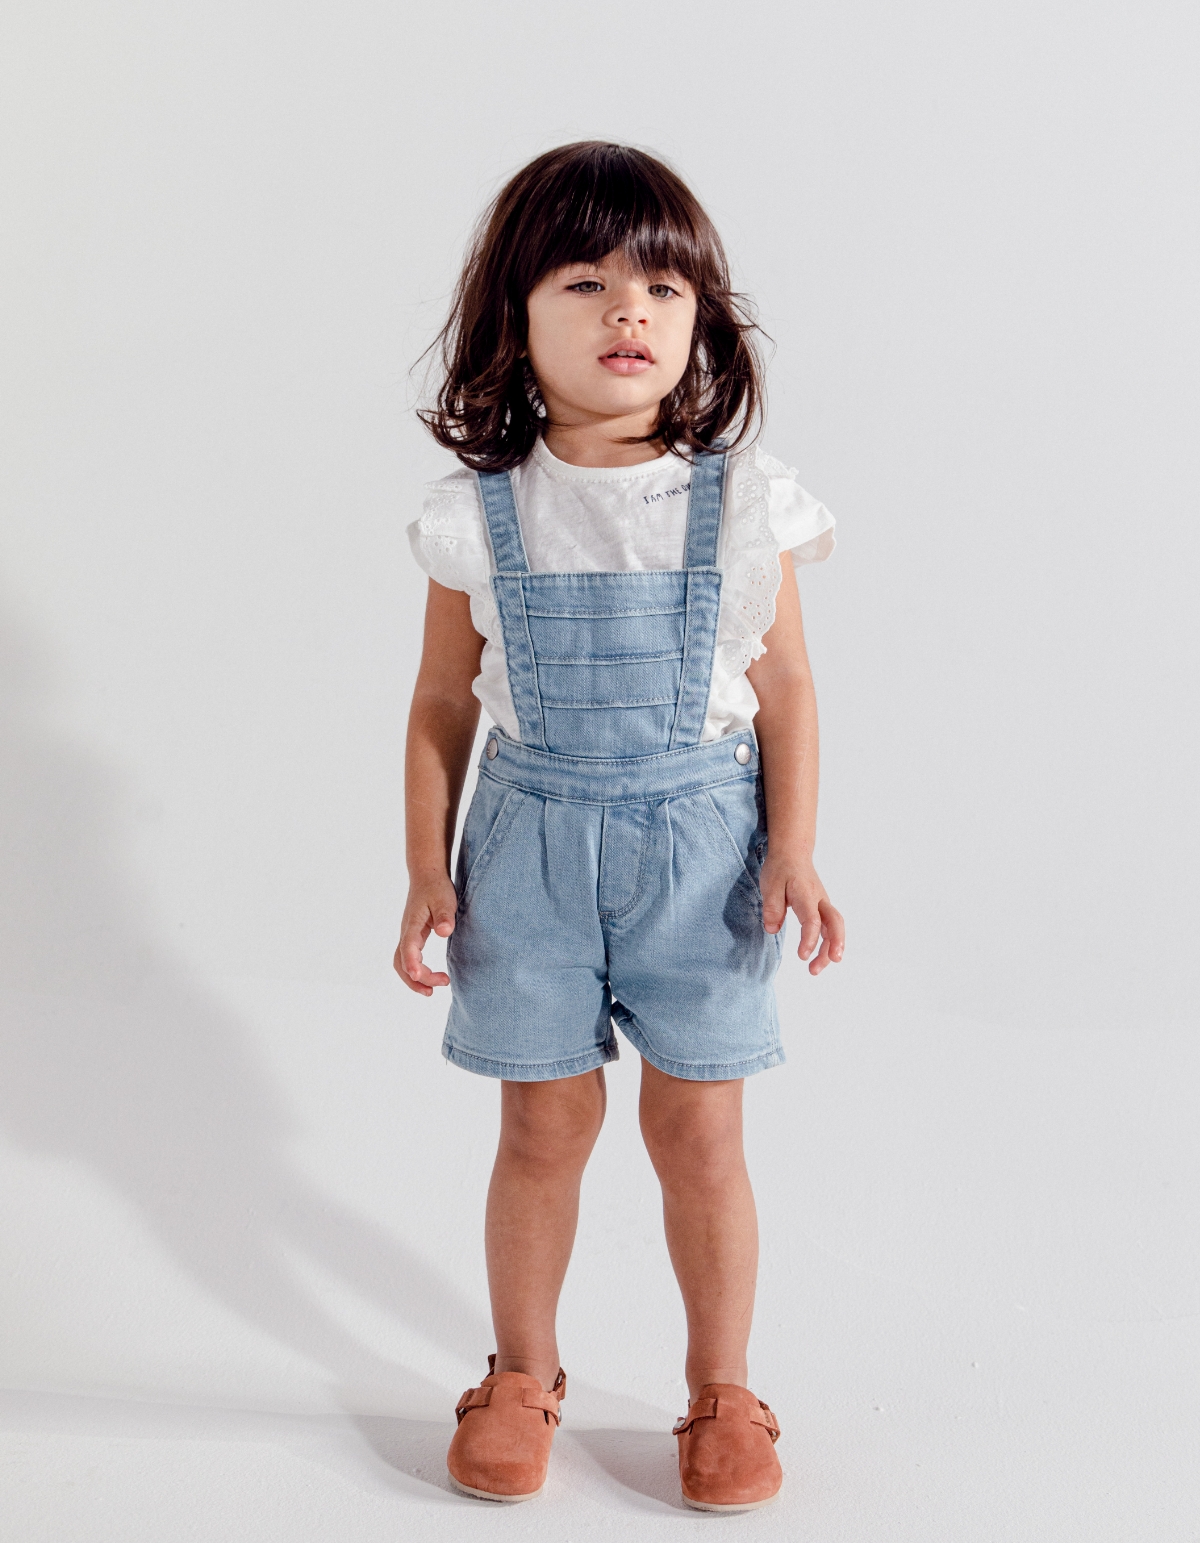 Baby girls’ denim dungarees & T-shirt outfit